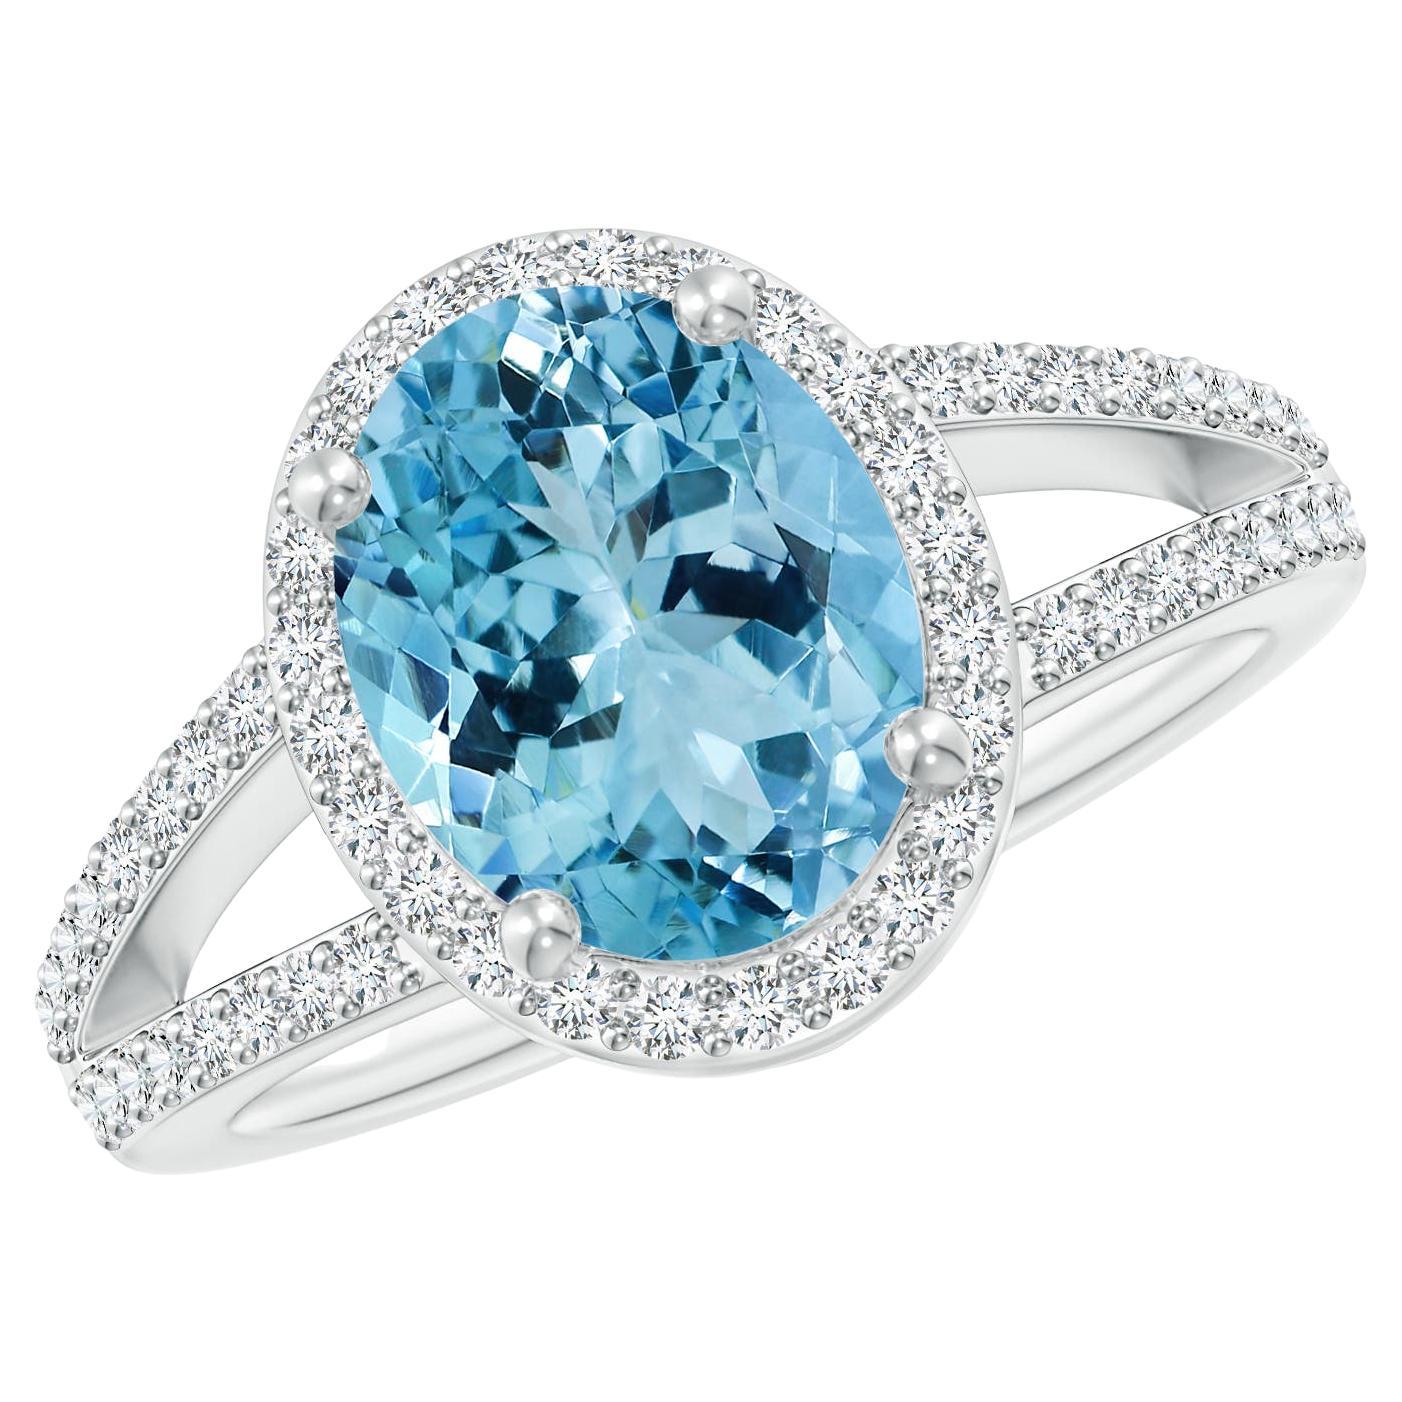 For Sale:  GIA Certified Natural Aquamarine Halo Ring in White Gold